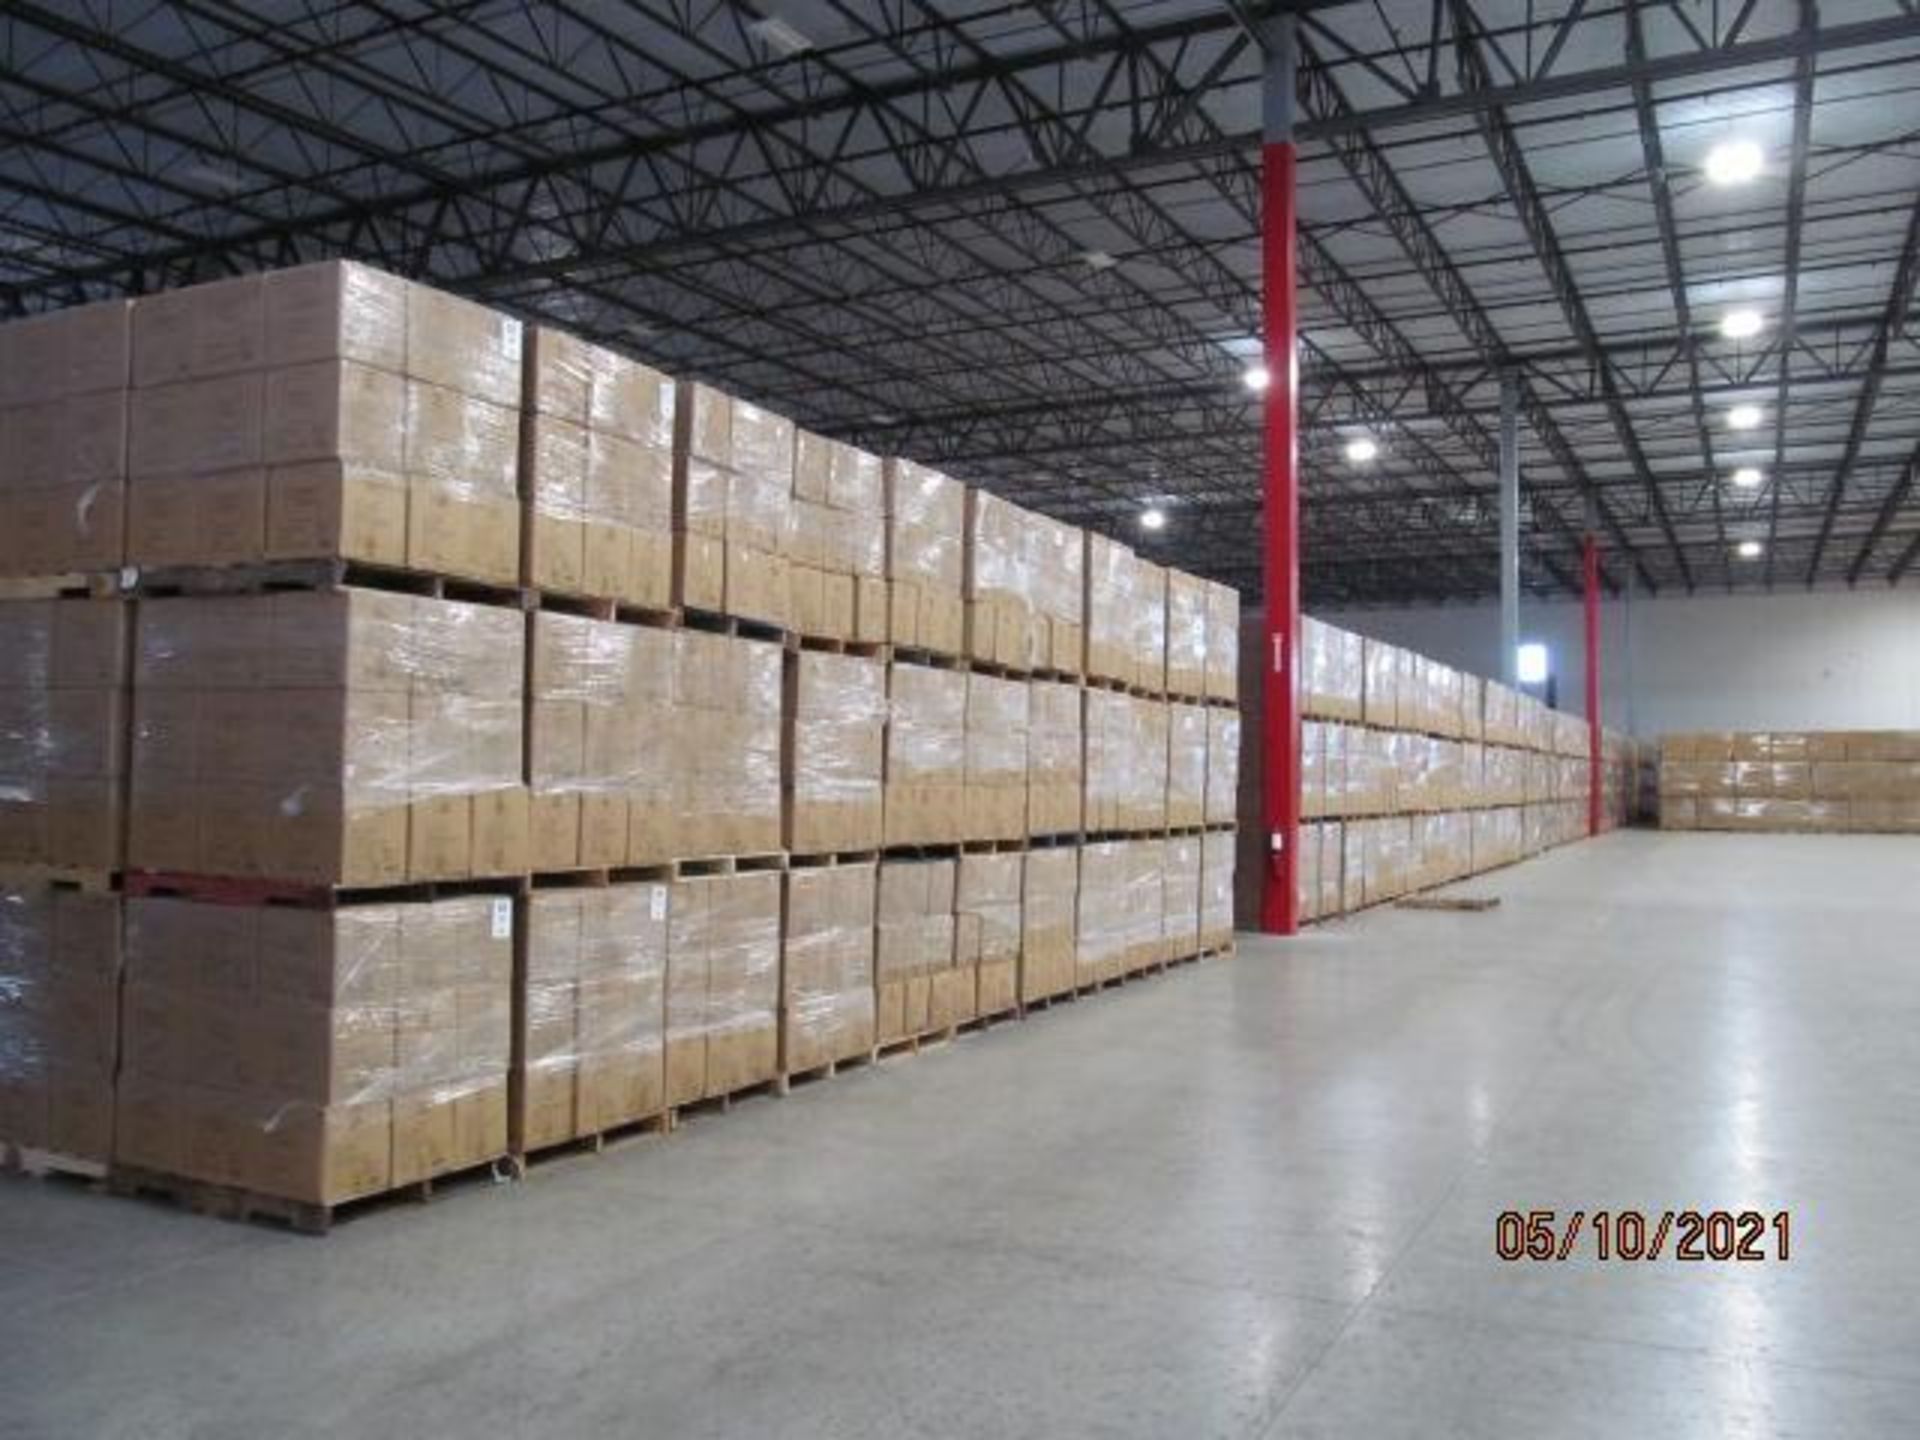 Lot of Waxman Kleen Freak Sanitizing Wipes consisting of 6,480 packages on 10 pallets. Each package - Image 8 of 11